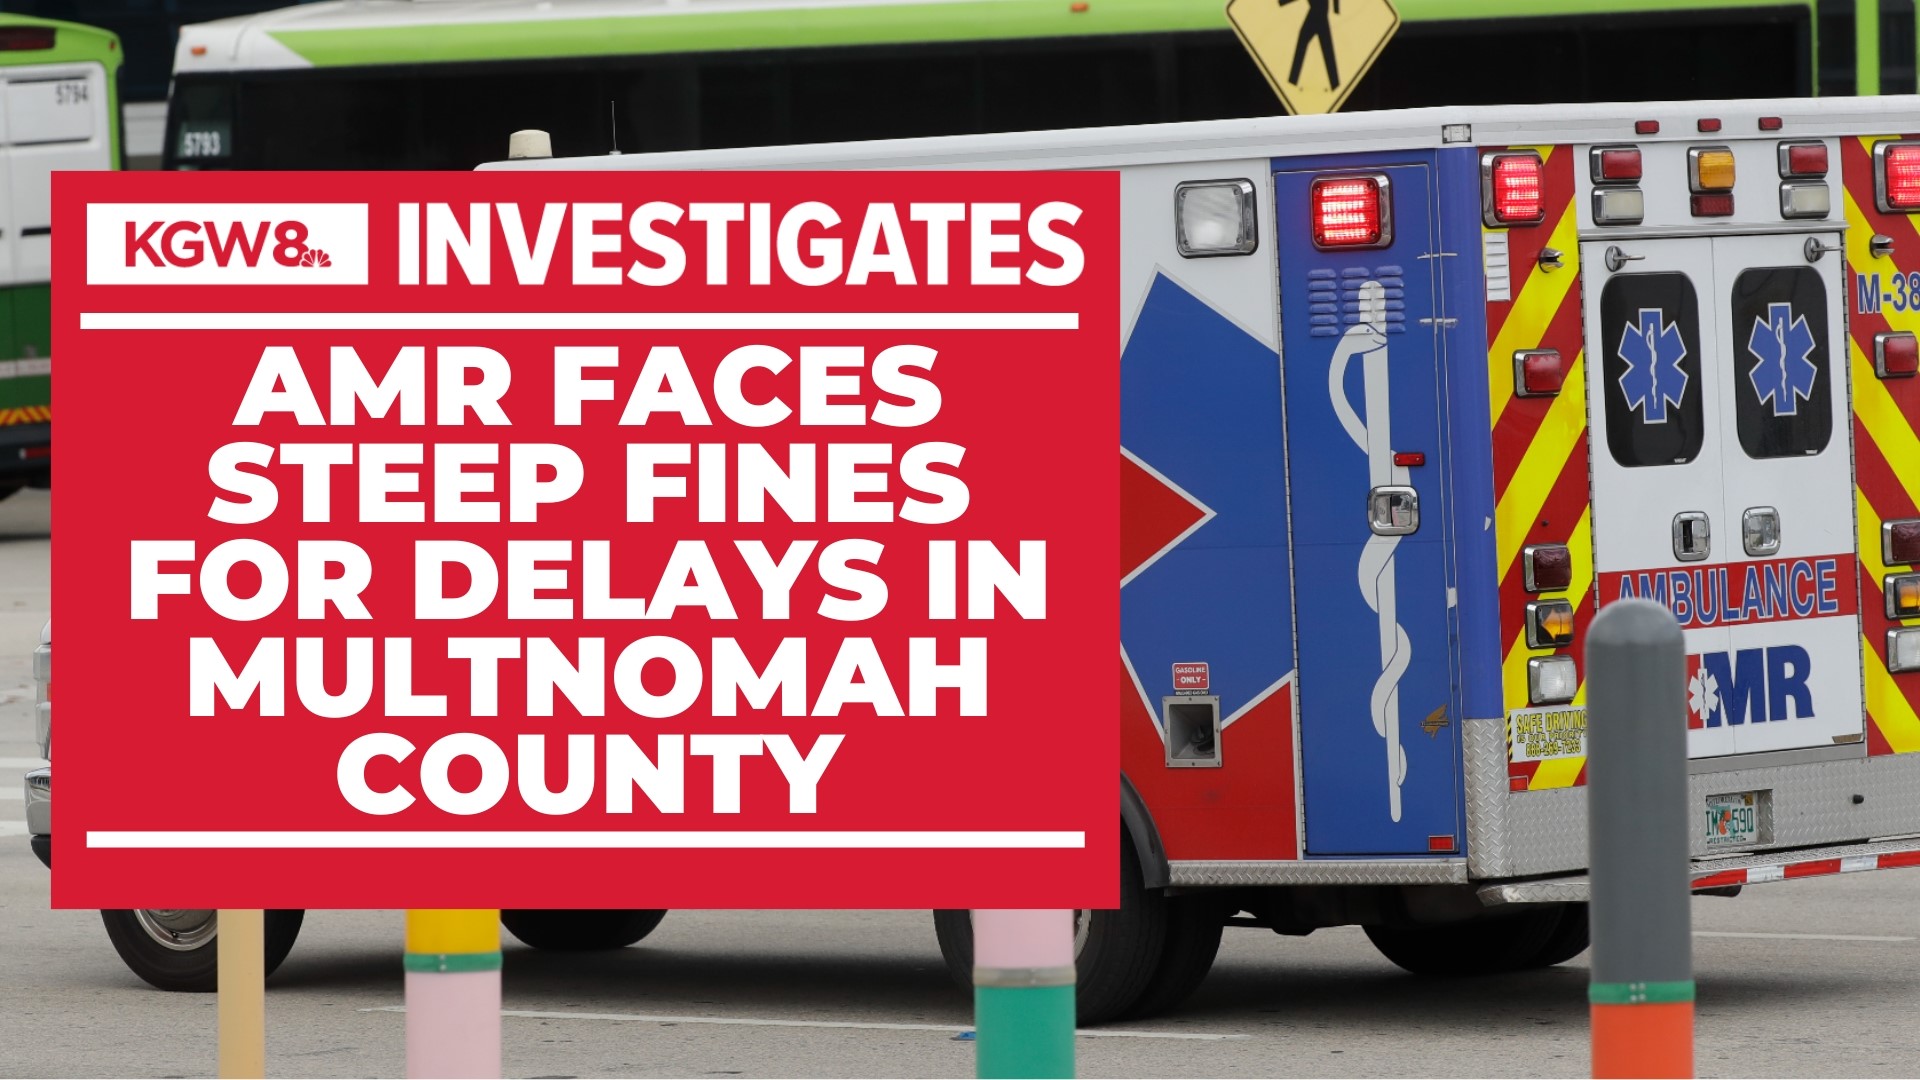 The county's contract with EMS provider AMR allows for fines of up to $500 for each time ambulances are extremely late in responding to emergency calls.